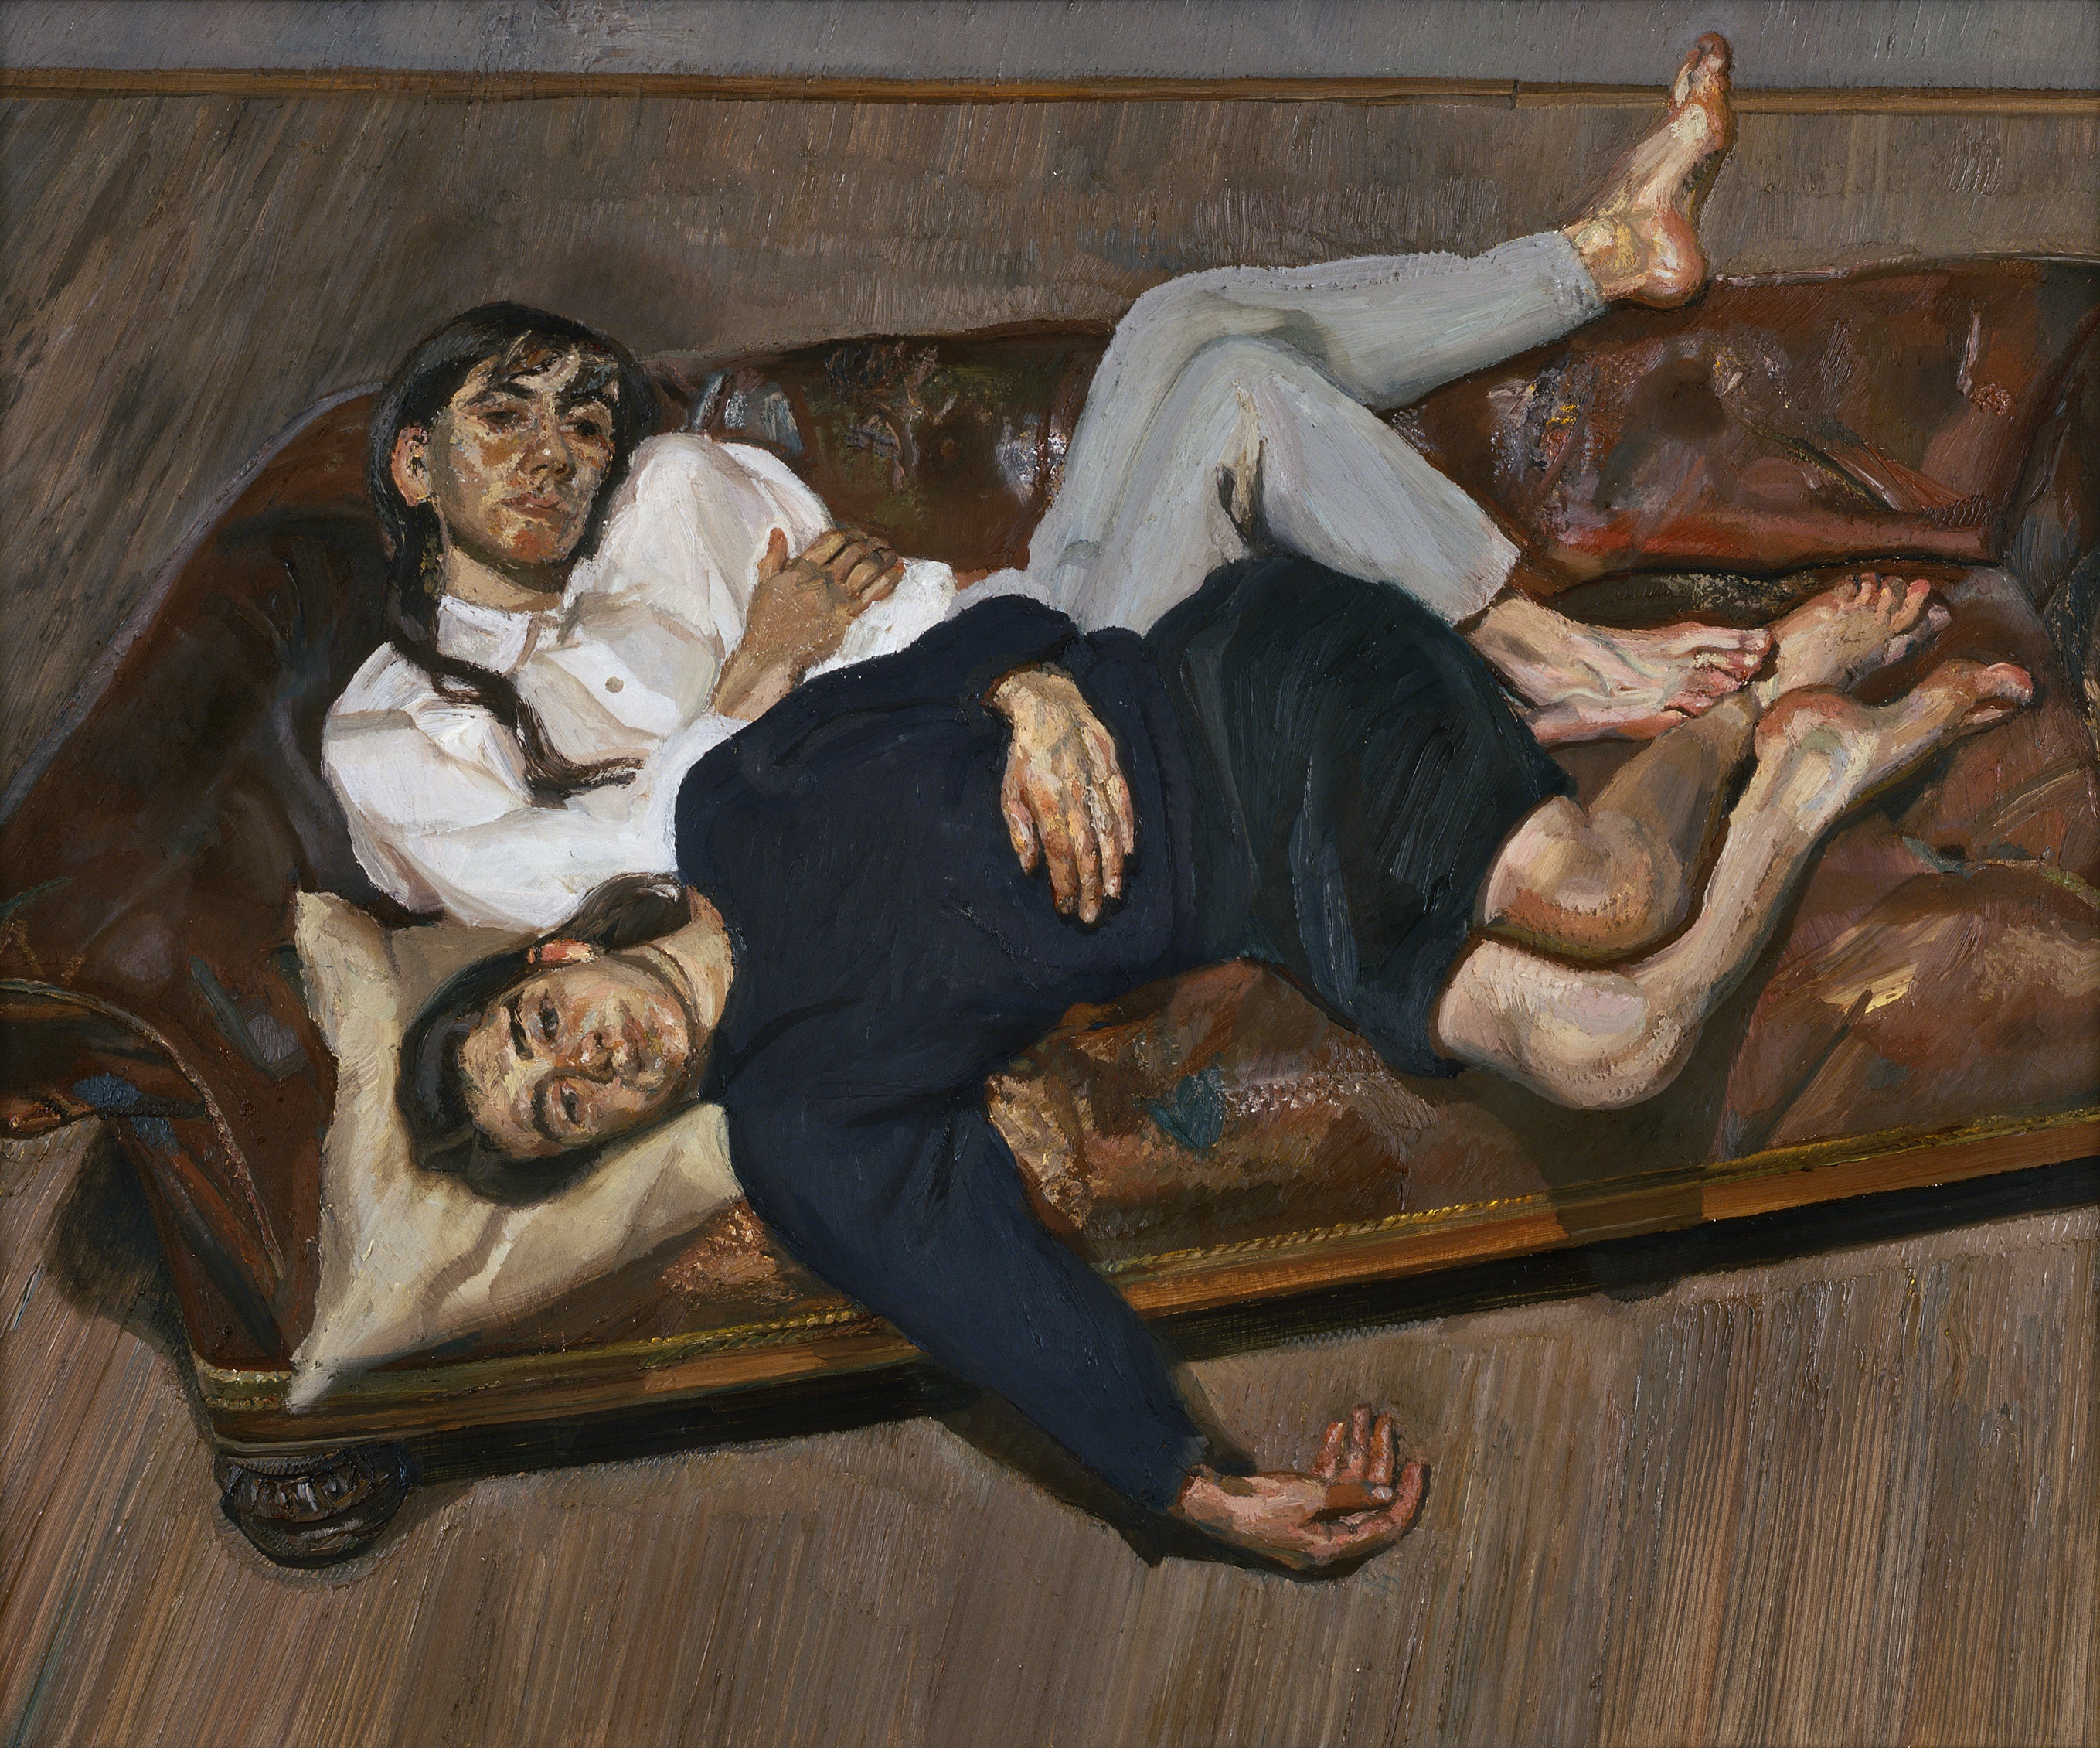 Bella and Esther, Lucian Freud, 1988